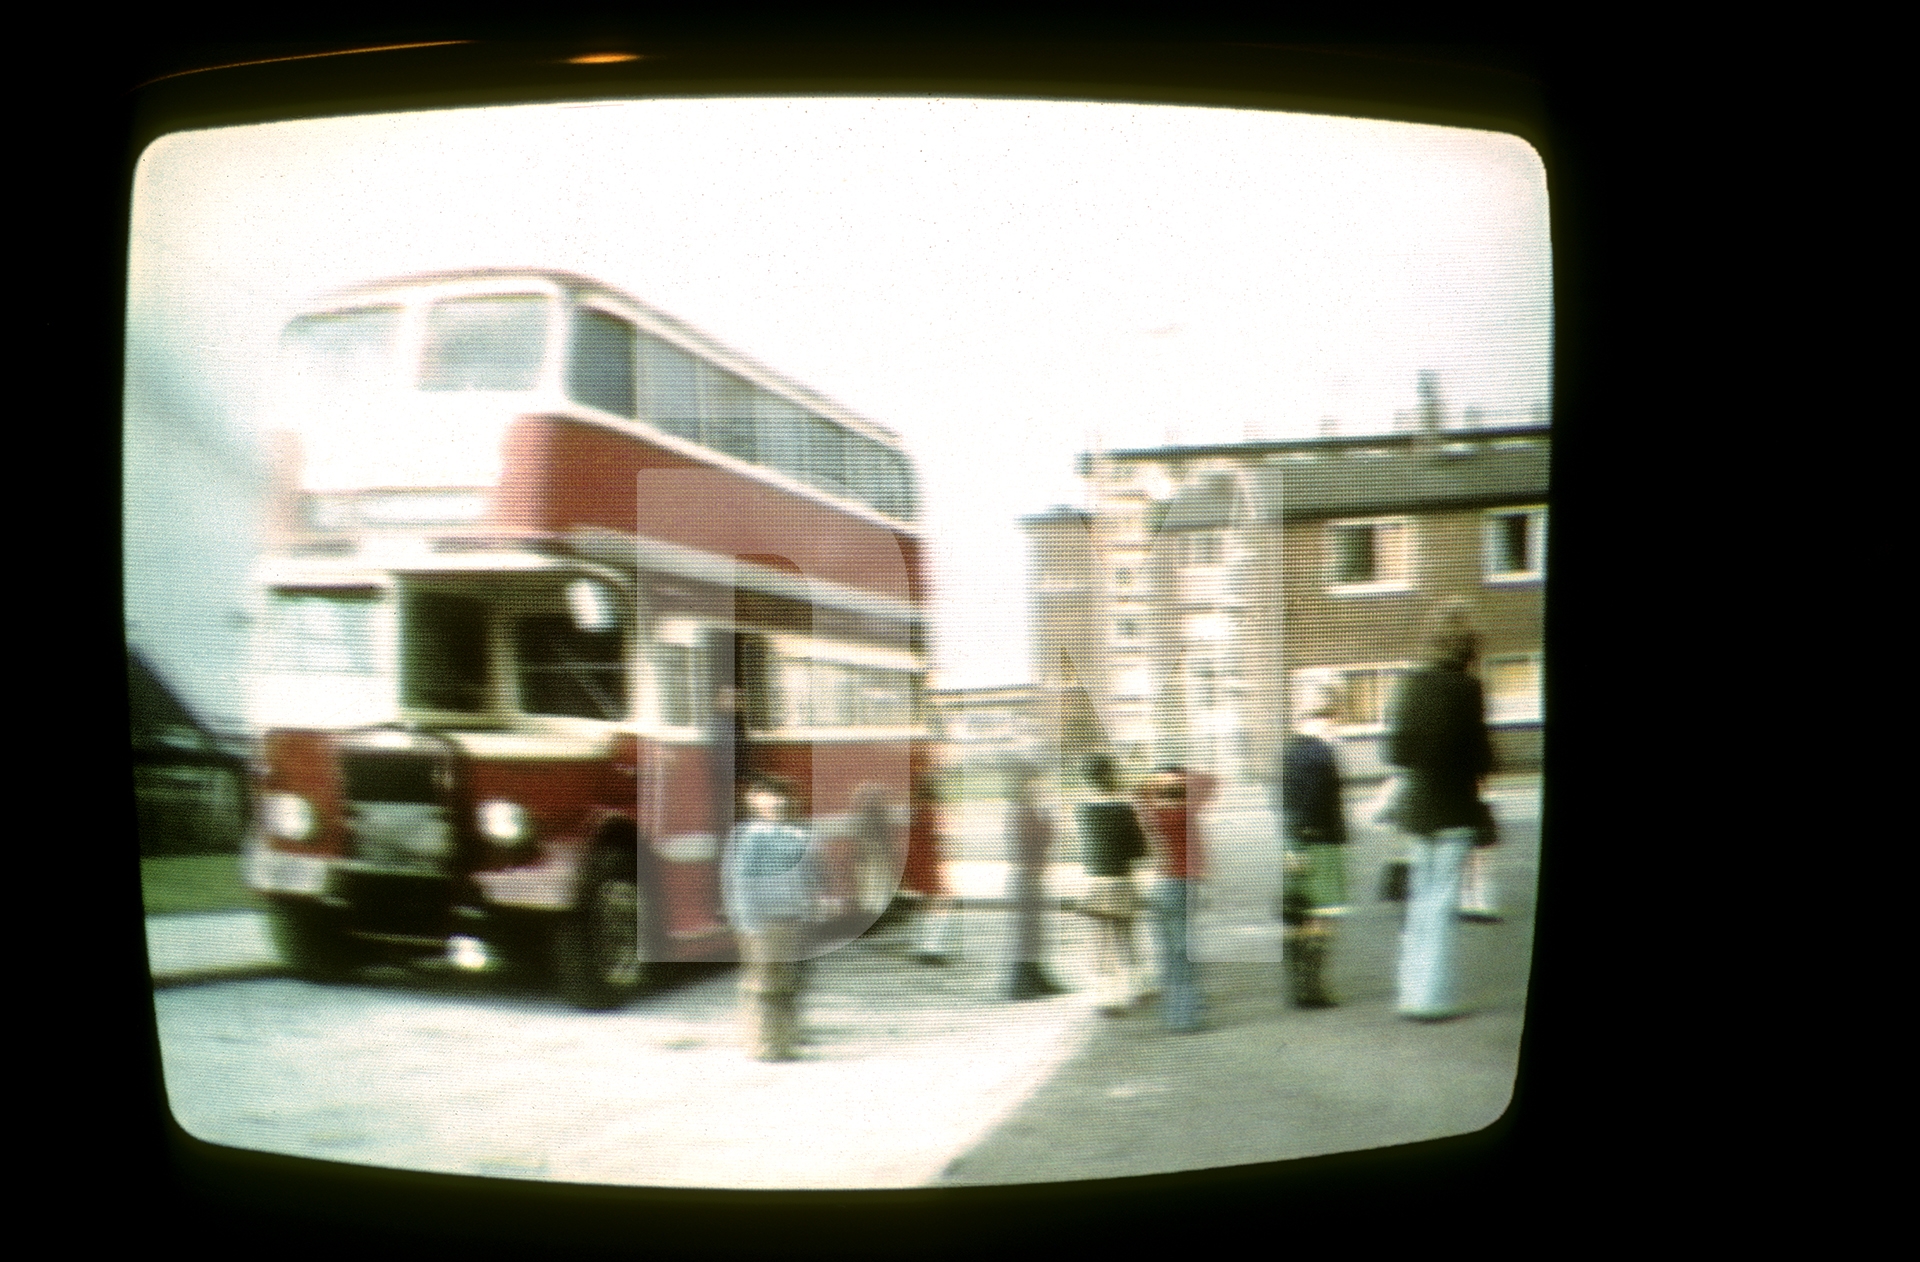 Free Photographic Omnibus as seen on TV, Granada Reports, outside St Philip’s Church of England Primary School, Hulme, Manchester. 7 February 1974 by Daniel Meadows